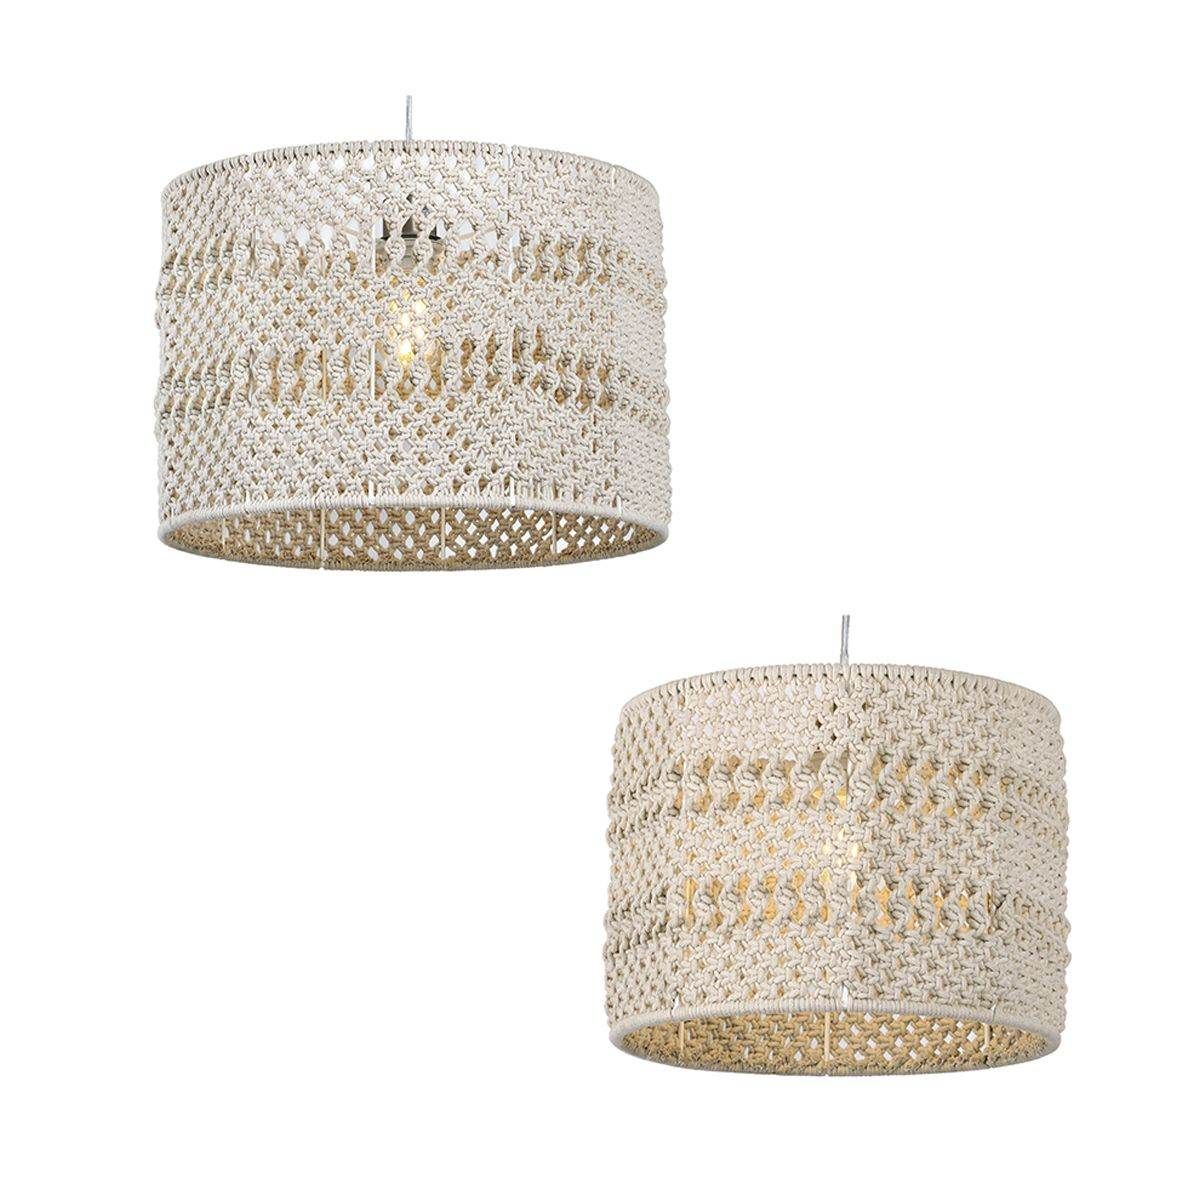 Devyn Natural Cotton Shade 2 Pack 30cm and 40cm - Cusack Lighting